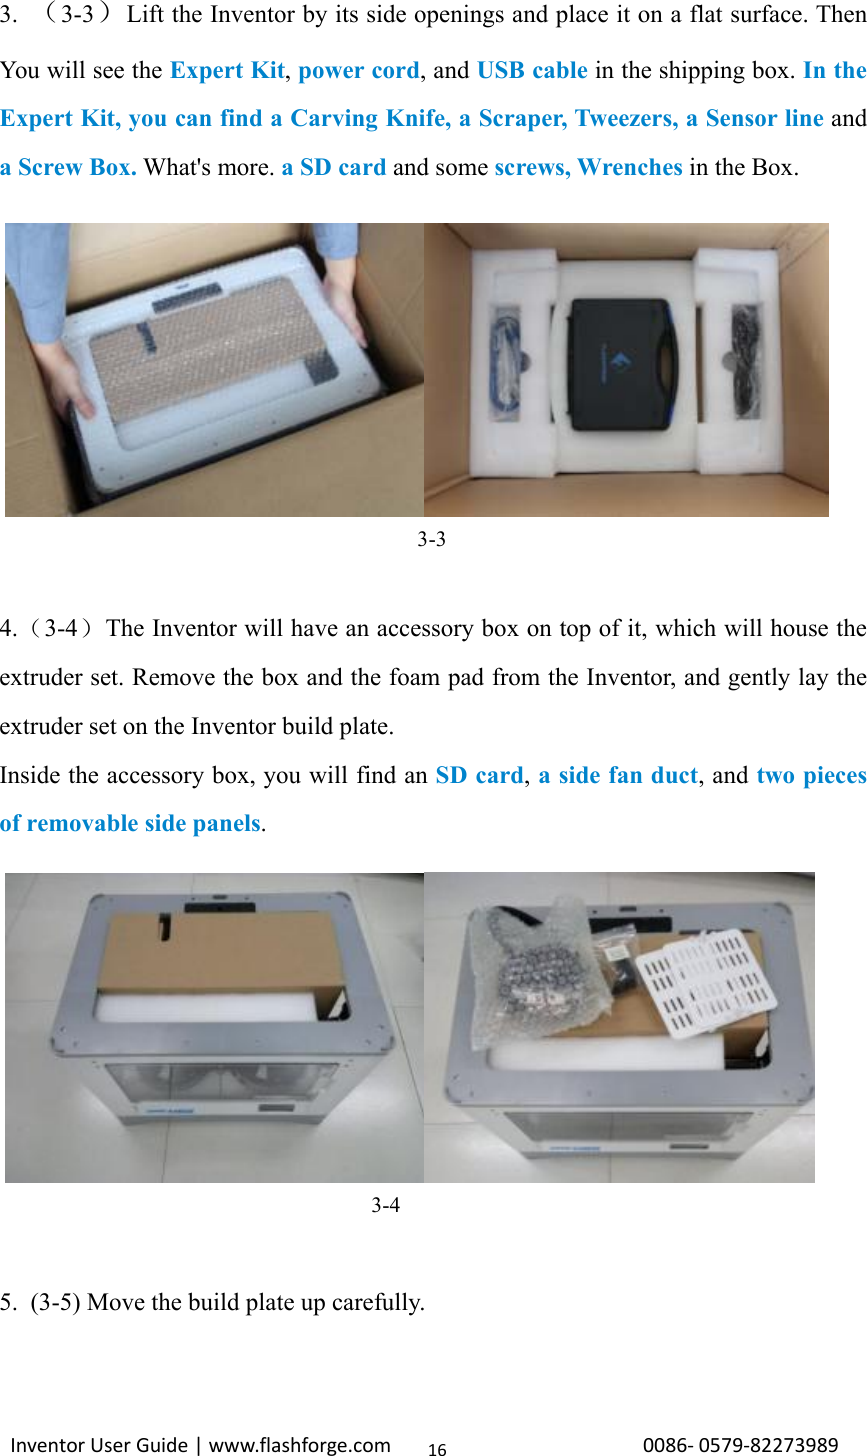 Inventor User Guide | www.flashforge.com 0086‐0579‐82273989163. （3-3）Lift the Inventor by its side openings and place it on a flat surface. ThenYou will see the Expert Kit,power cord,andUSB cable in the shipping box. In theExpert Kit, you can find a Carving Knife, a Scraper, Tweezers, a Sensor line anda Screw Box. What&apos;s more. a SD card and some screws, Wrenches in the Box.3-34.（3-4）The Inventor will have an accessory box on top of it, which will house theextruder set. Remove the box and the foam pad from the Inventor, and gently lay theextruder set on the Inventor build plate.Inside the accessory box, you will find an SD card,asidefanduct,andtwo piecesof removable side panels.3-45. (3-5) Move the build plate up carefully.